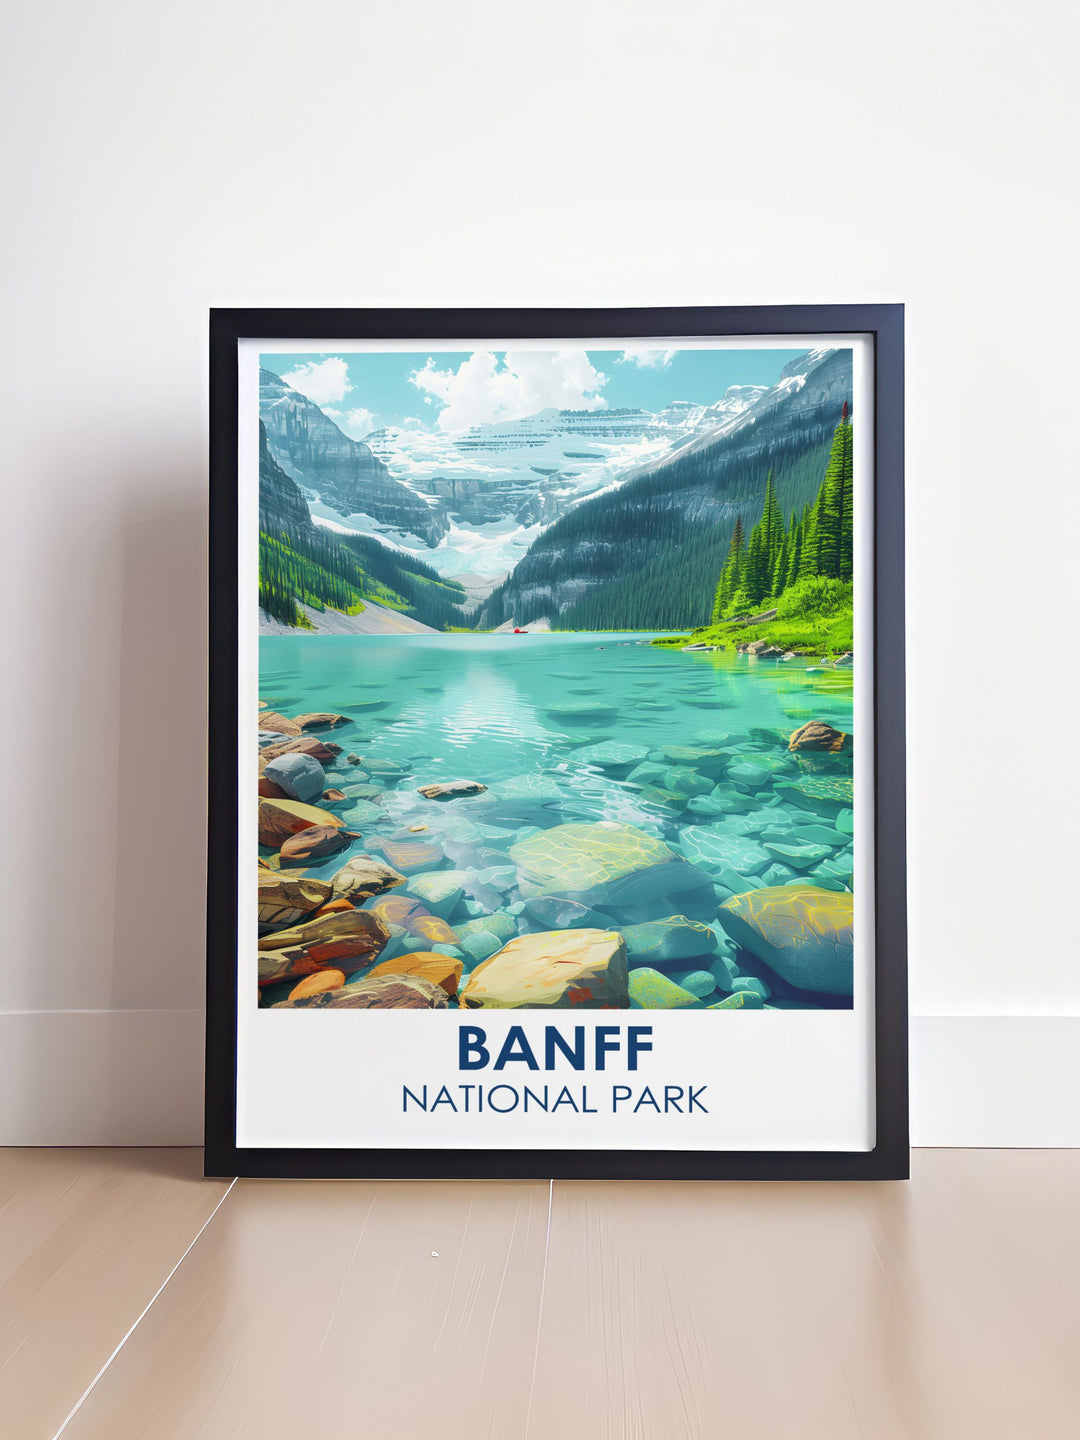 Framed art of Lake Louise showcasing the tranquil, turquoise waters set against the rugged backdrop of the Canadian Rockies, ideal for adding a serene touch to any interior space.